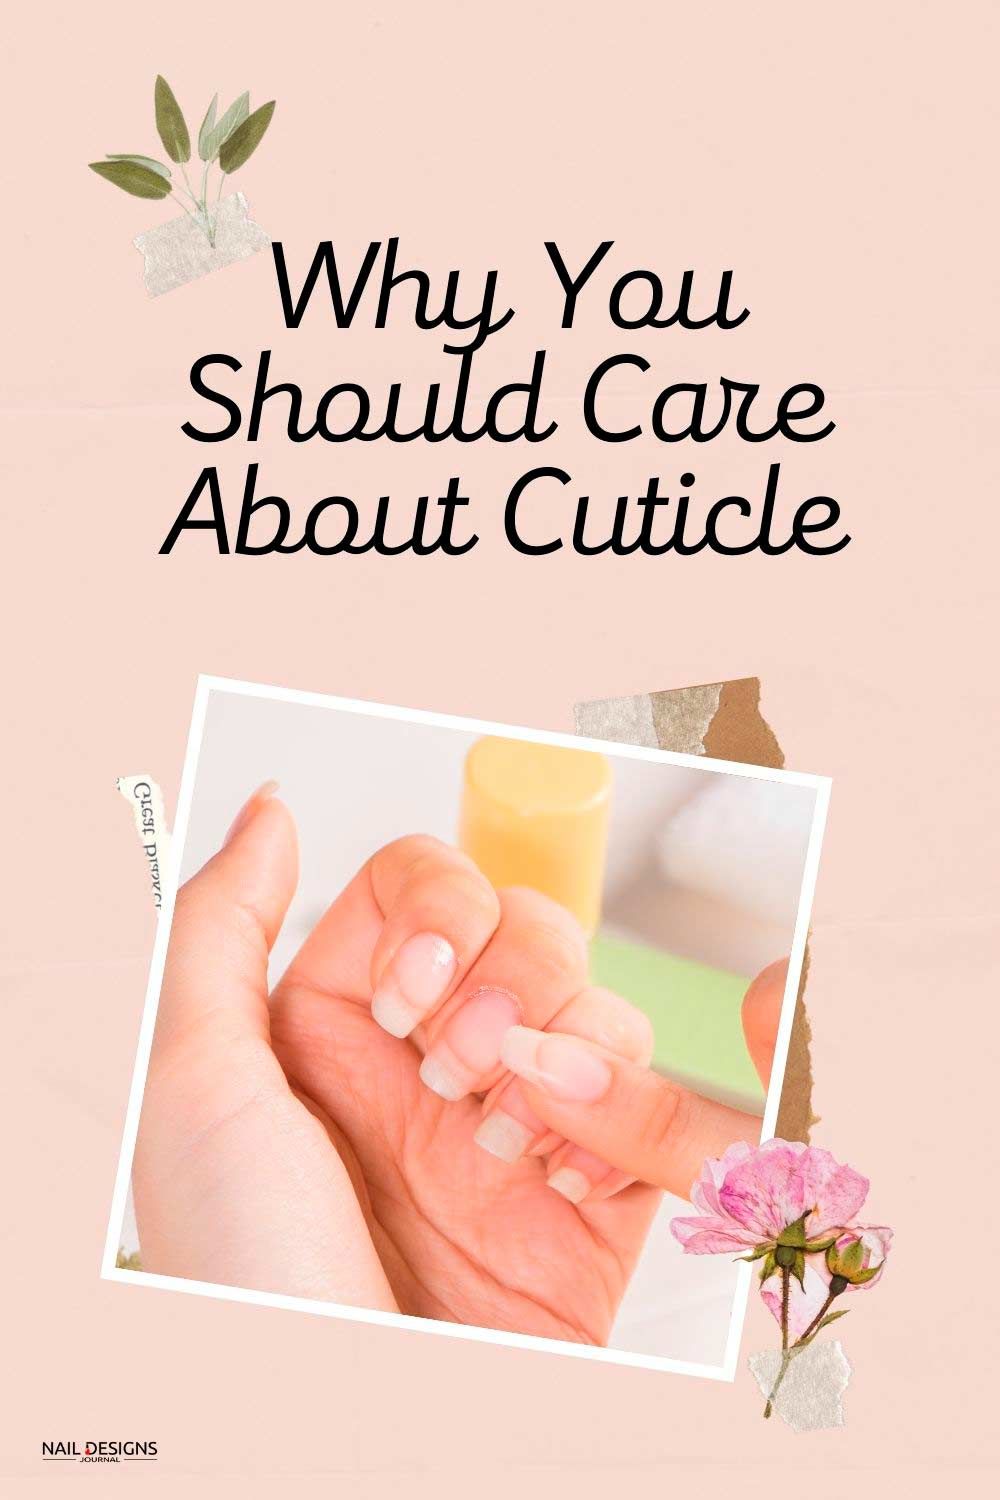 What Is A Cuticle And Why You Should Care For It?